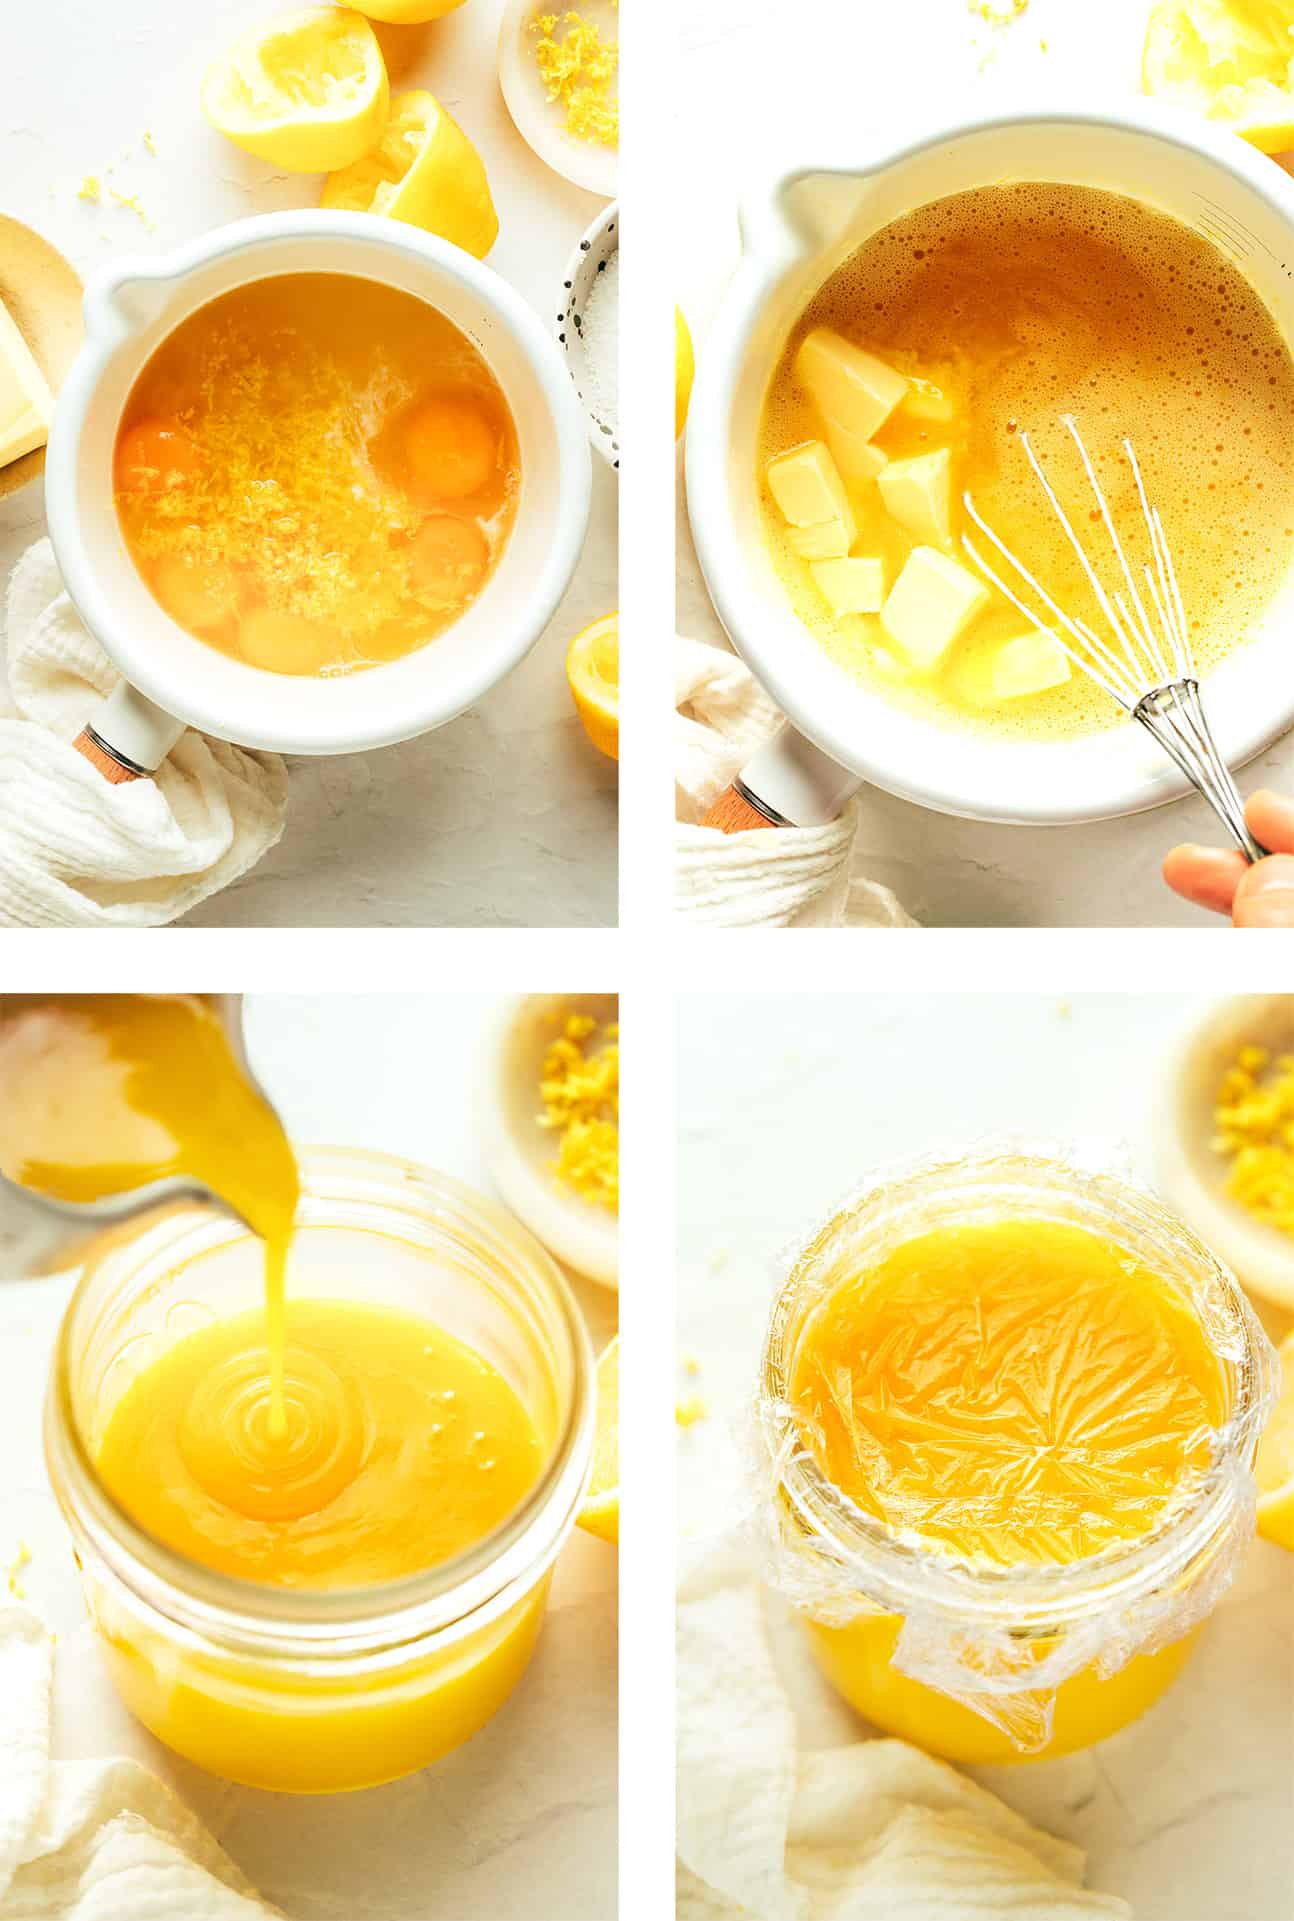 Step by step photos showing how to make lemon curd